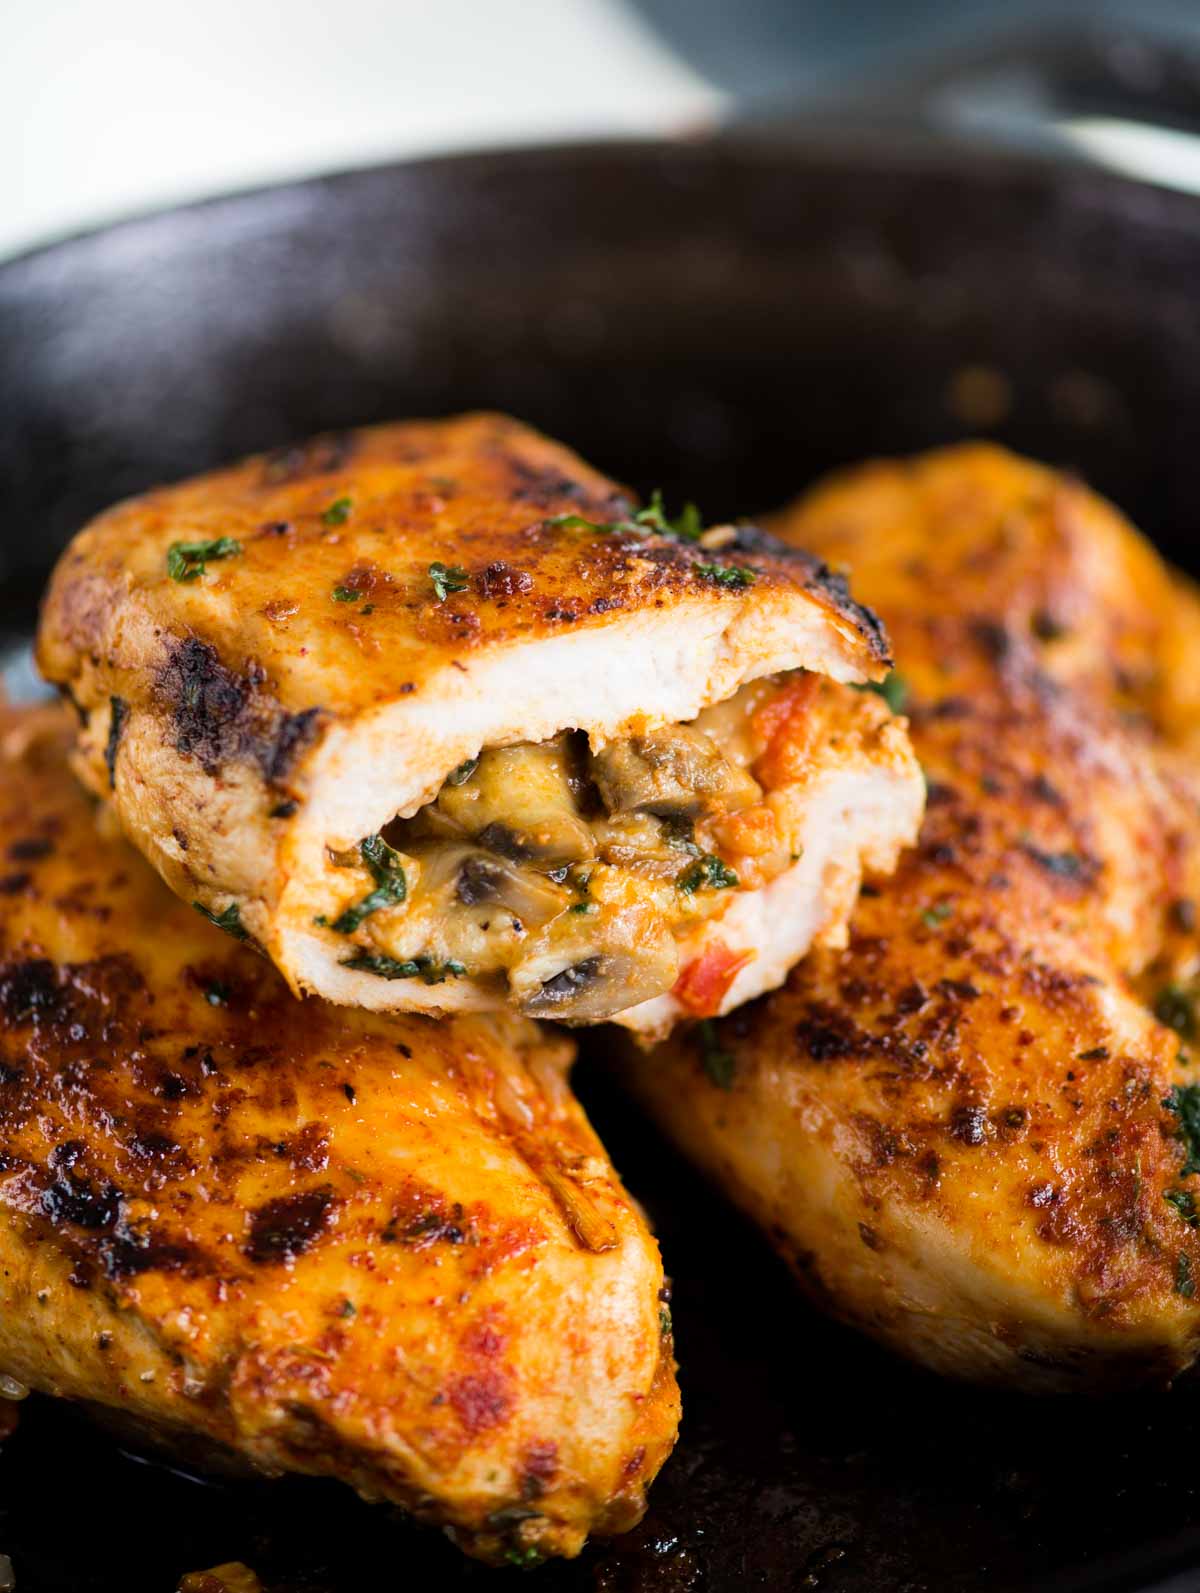 Close up view of a Stuffed Chicken breast cut in half. The Mushroom spinach and cheese stuffing is visible.